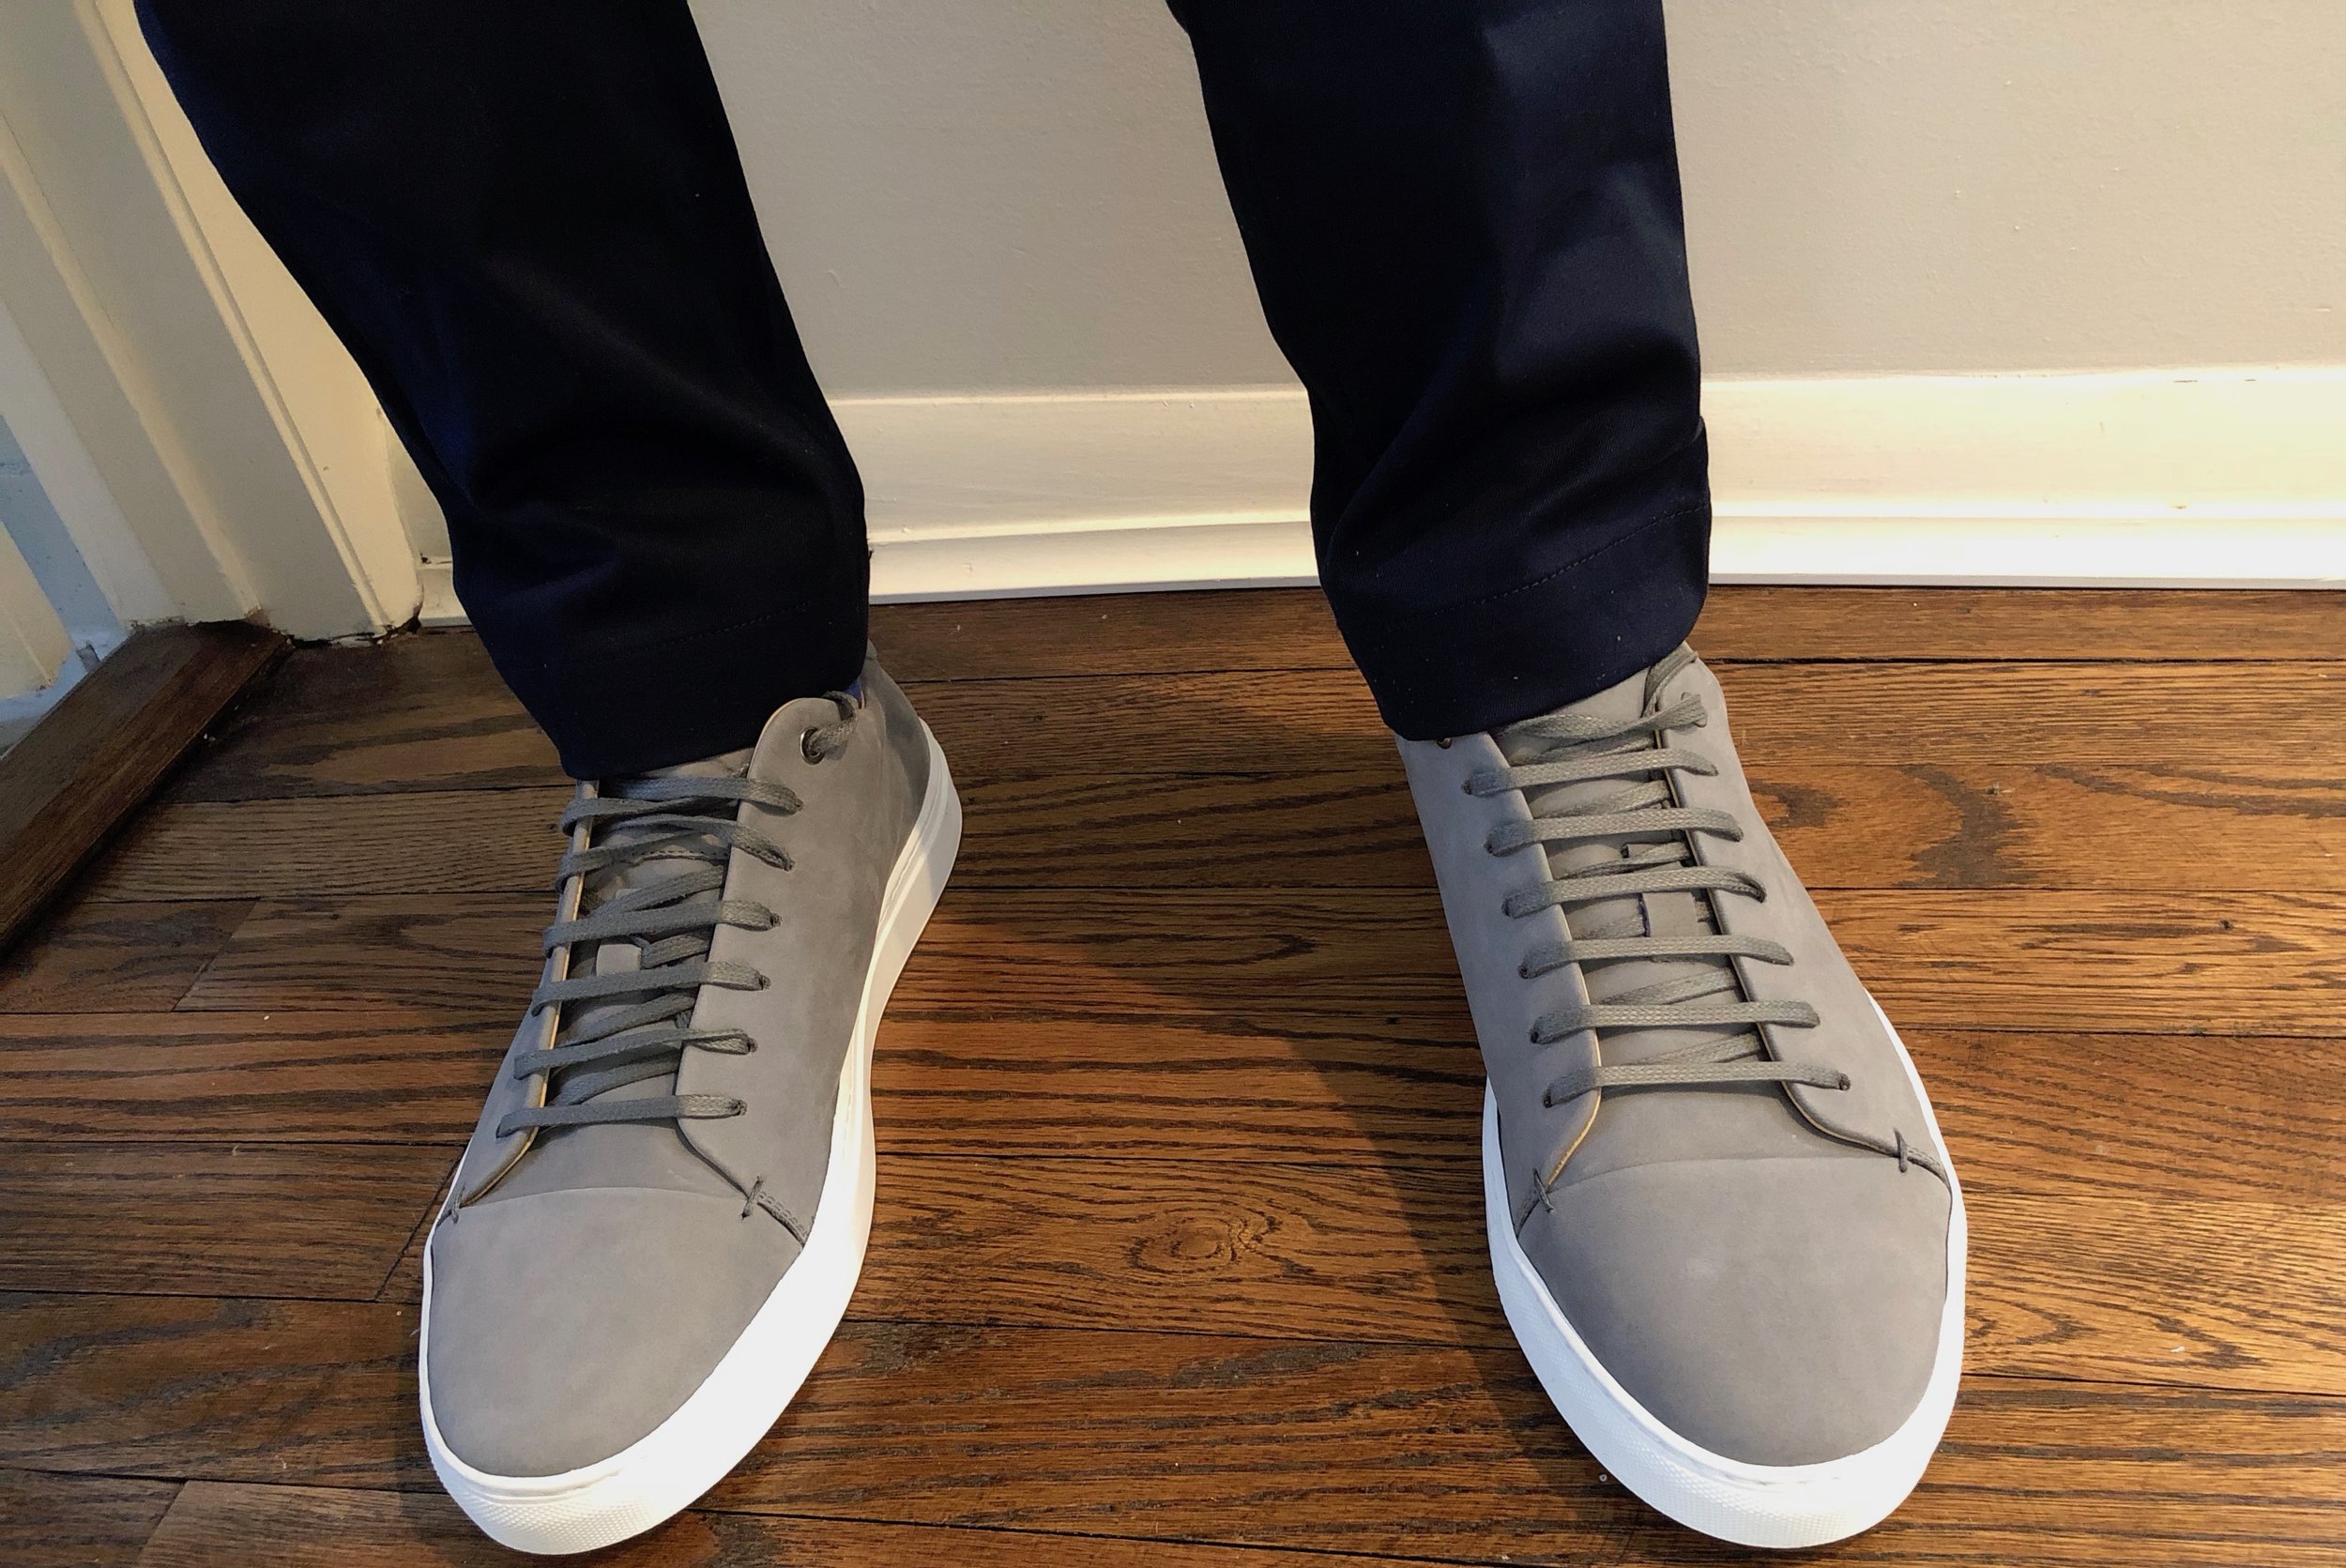 SuitSupply Sneakers and Dress Shoes In 